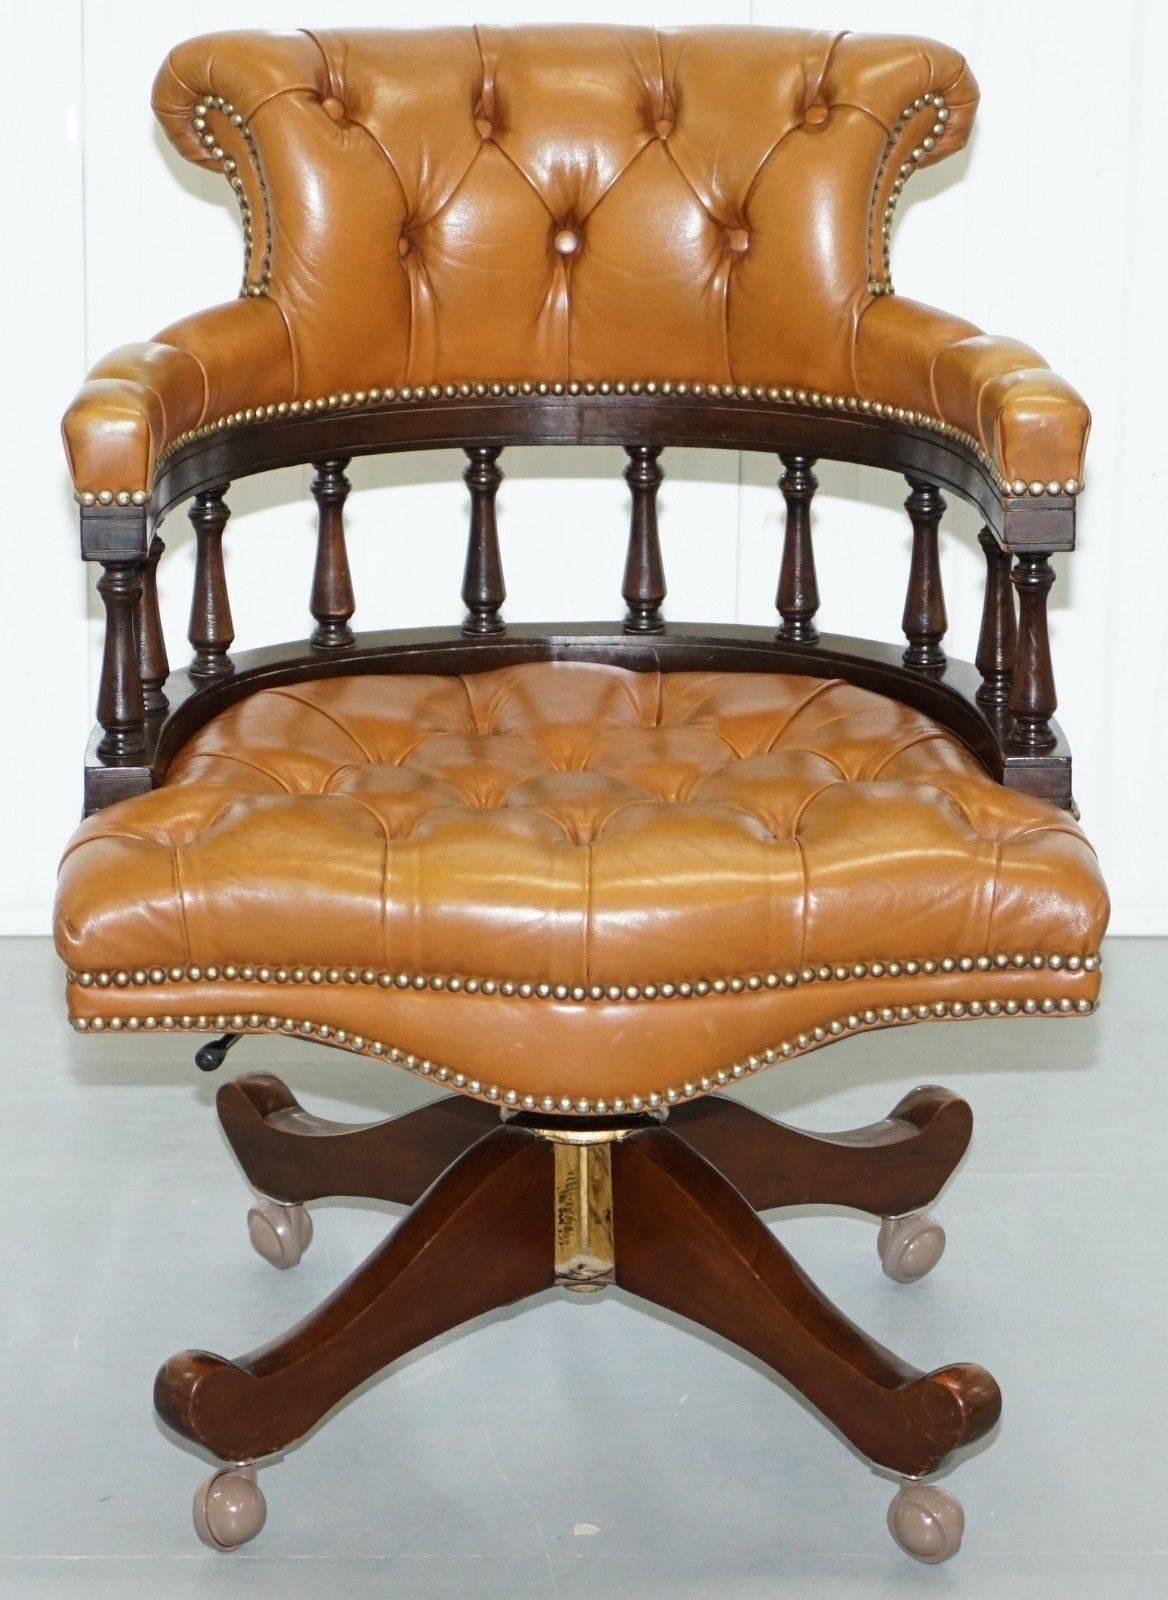 We are delighted to offer for sale this lovely vintage original Chesterfield aged brown leather captain’s chair

The chair was made by the Original Chesterfield Company in 1970s, the frame is oak and beech wood, the leather is fully aniline